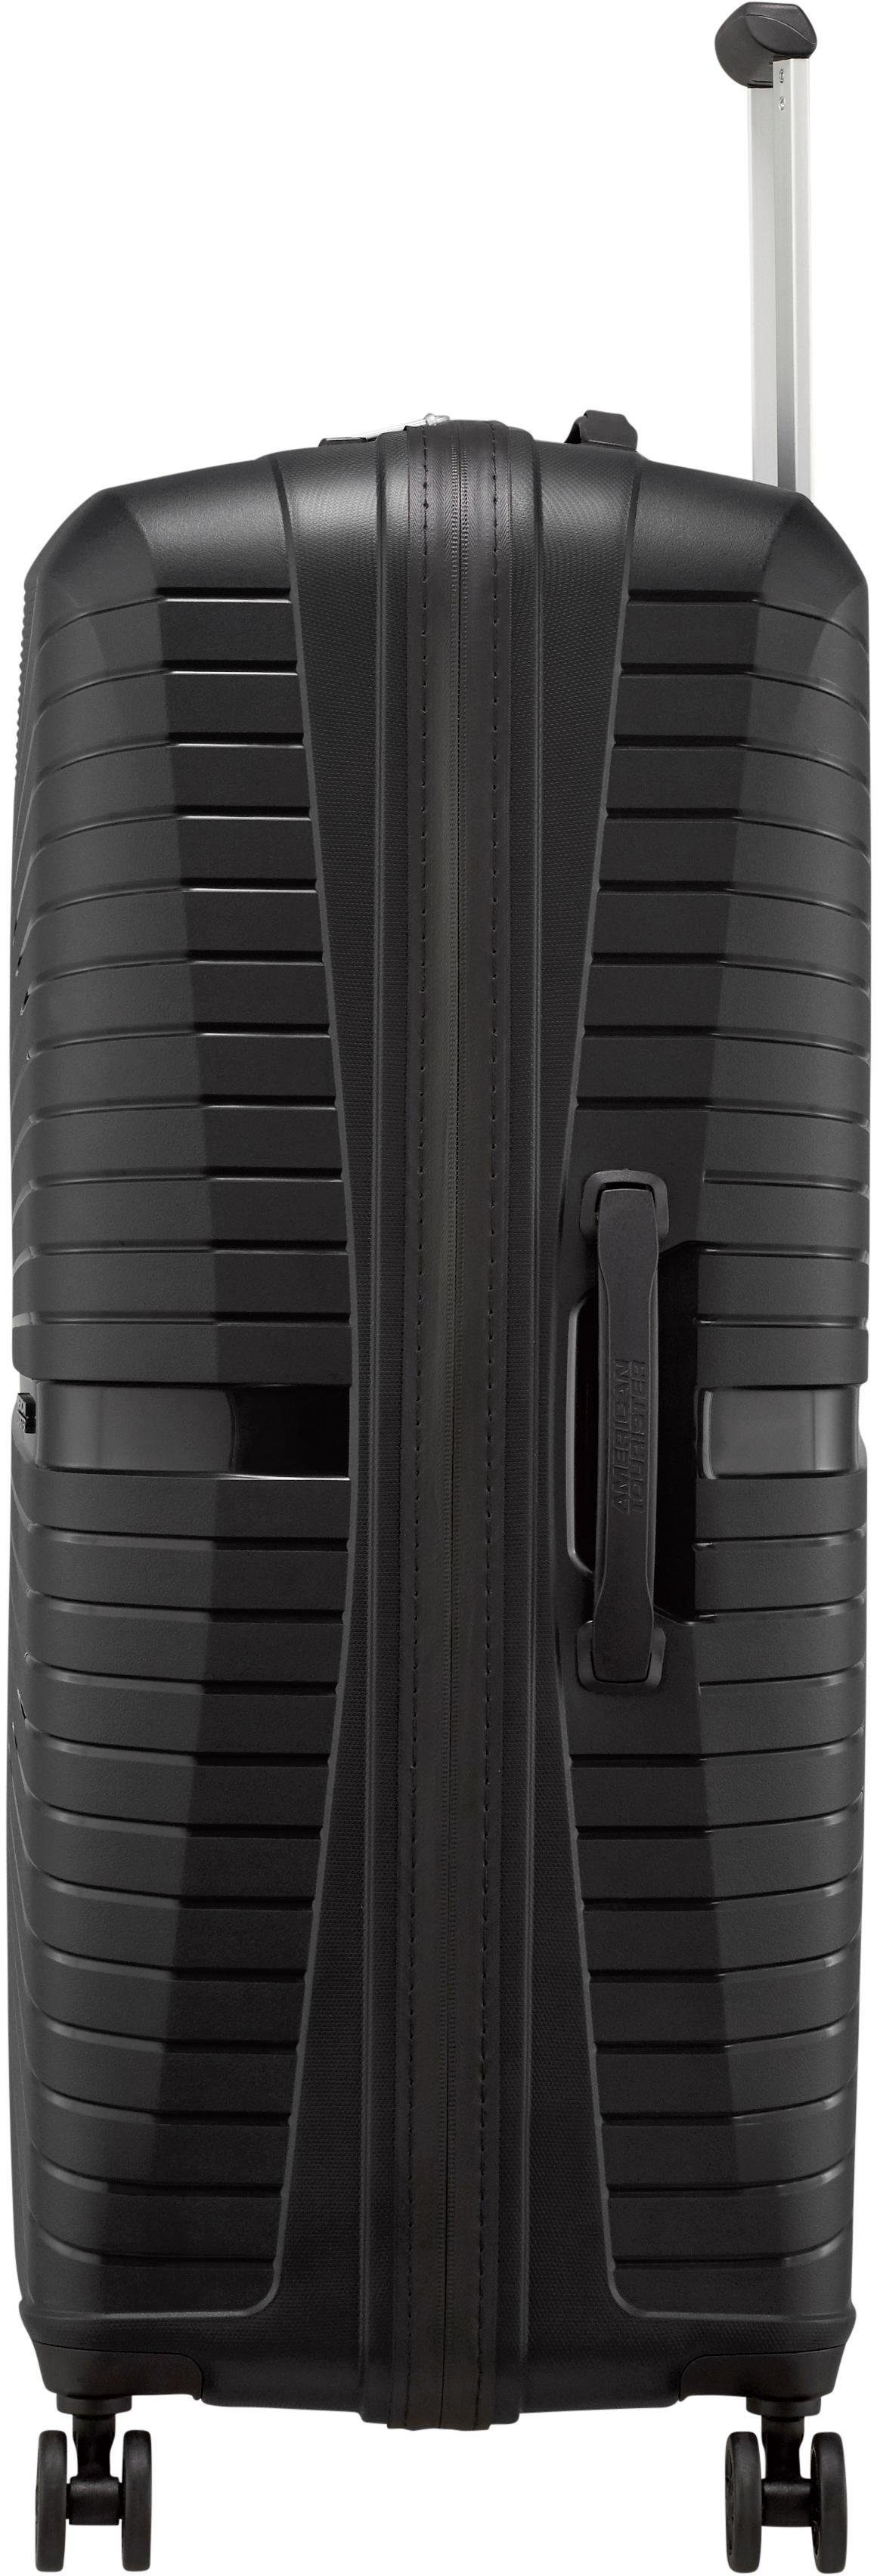 American Tourister® Koffer 77, AIRCONIC Spinner Onyx 4 Rollen Black